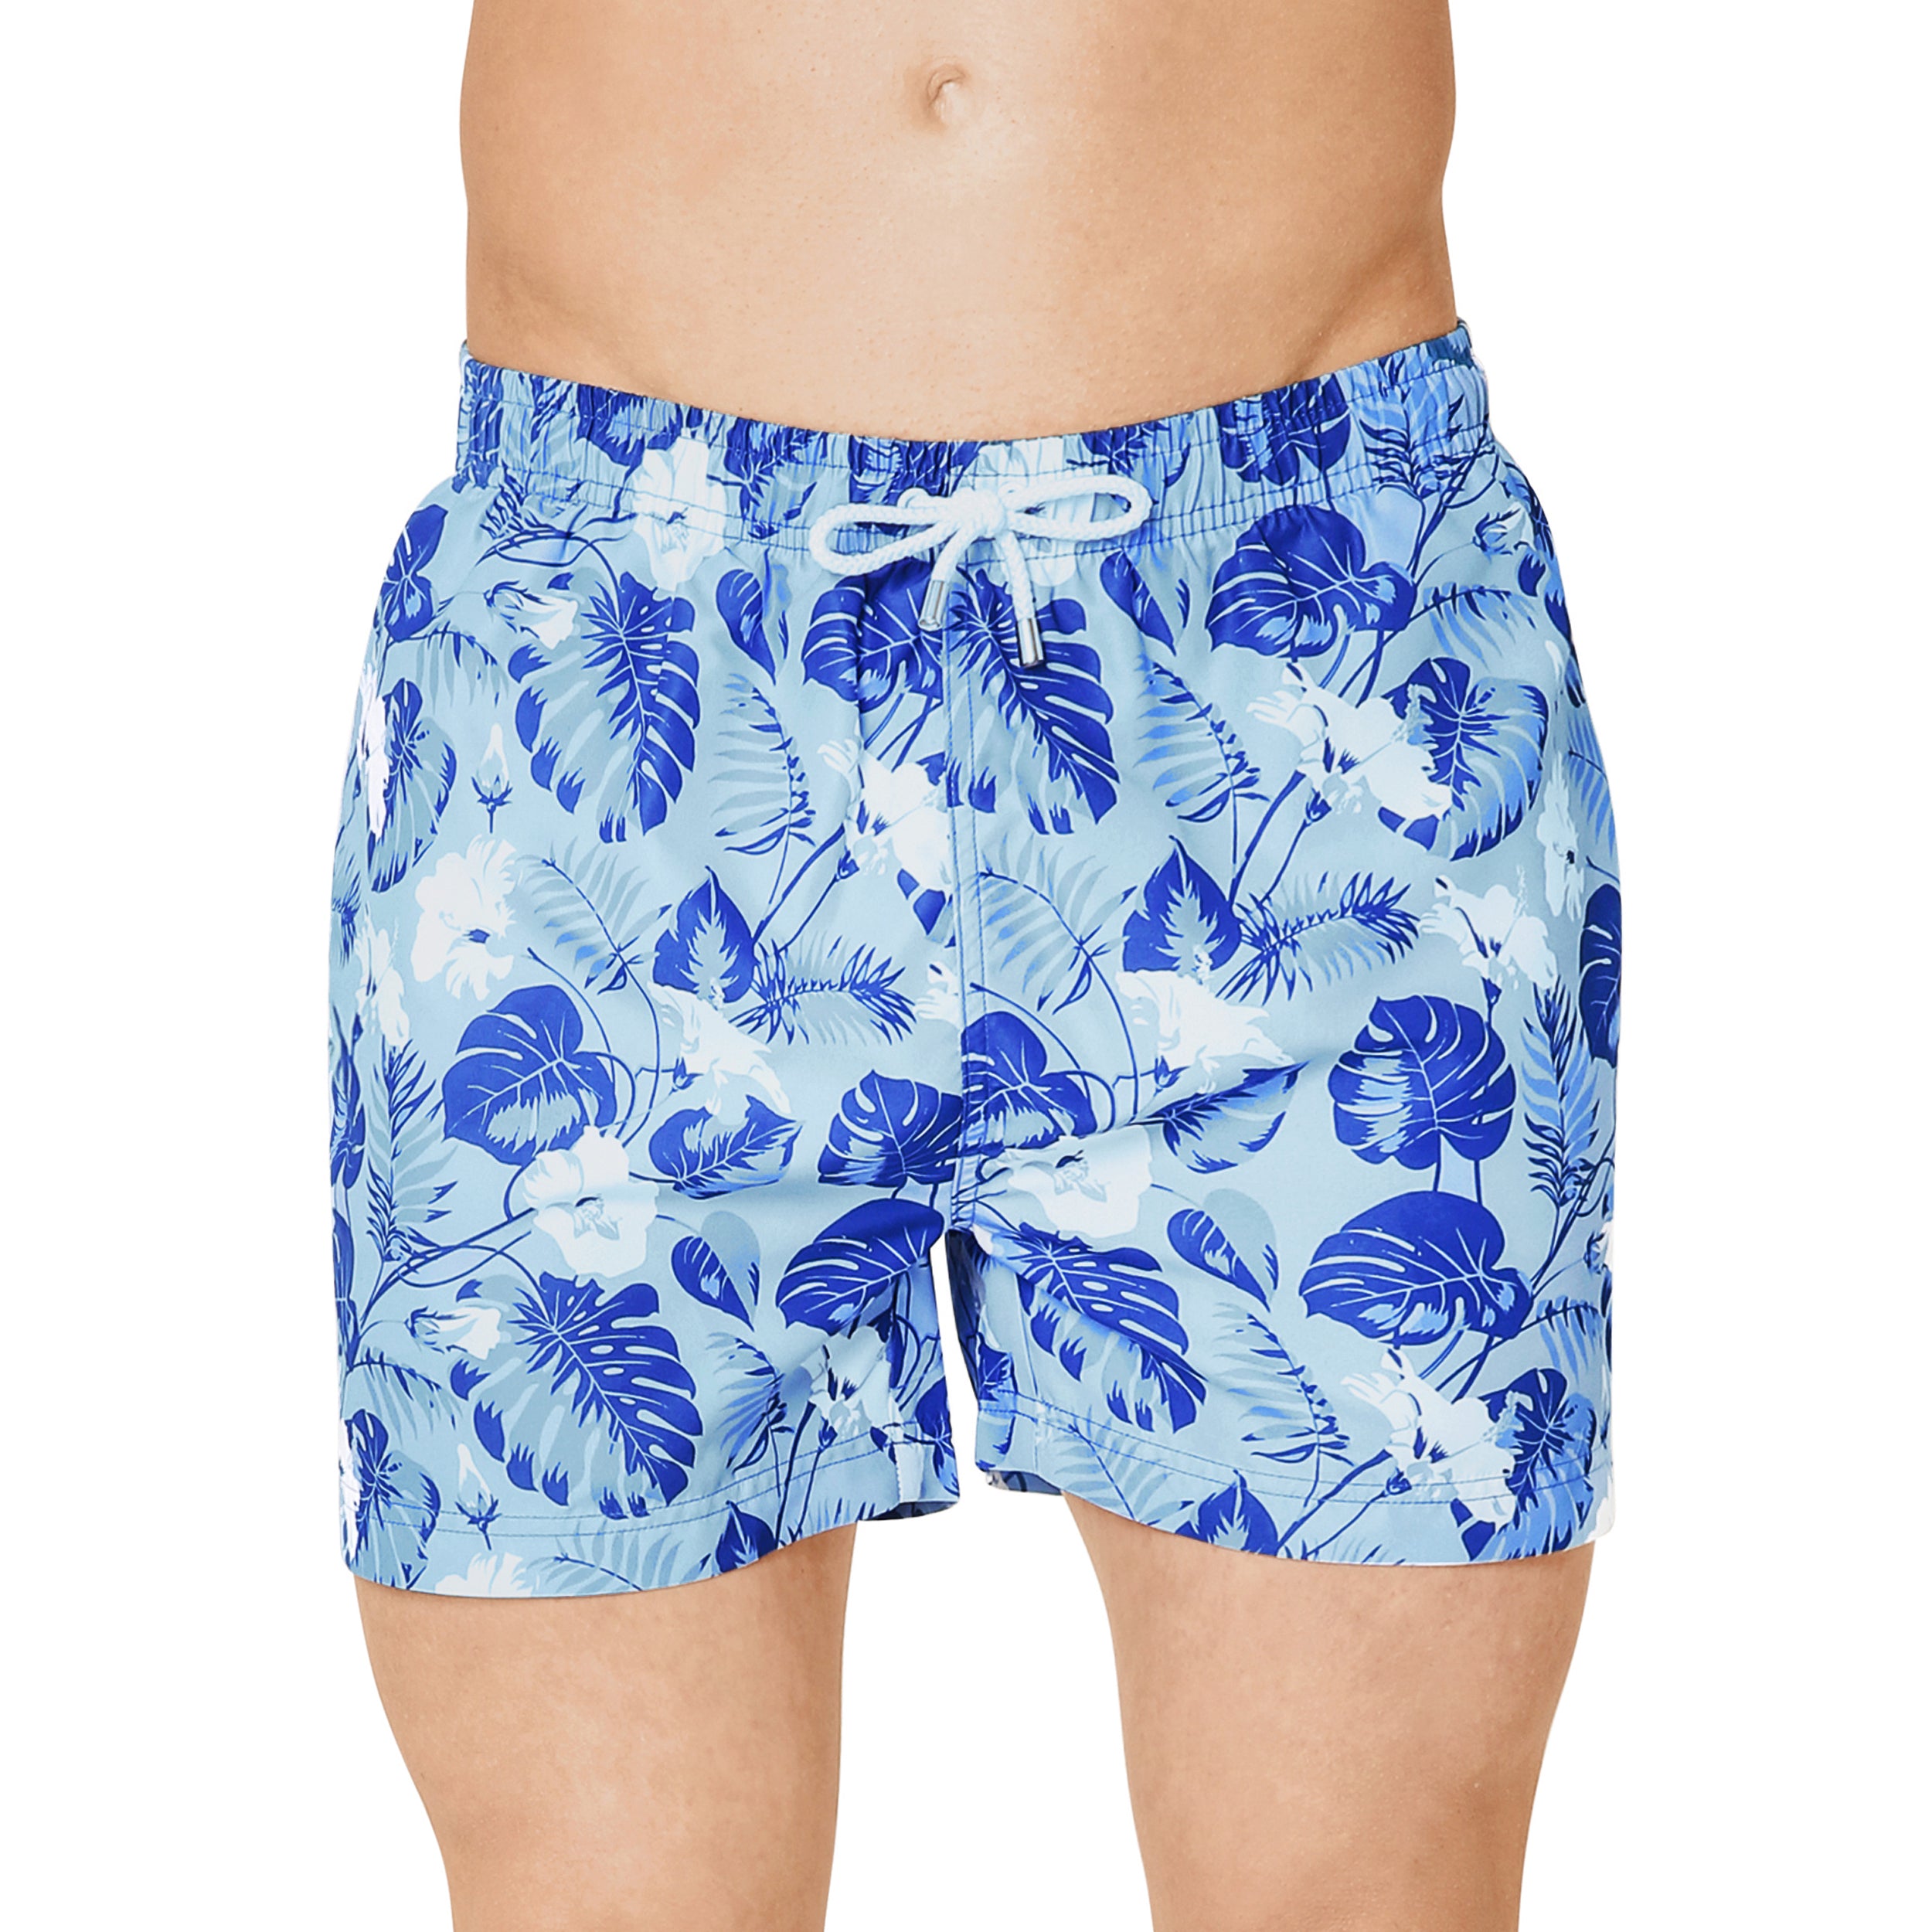 Printed swim shorts with mesh lining, TURQUOISE color. With travel pouch!